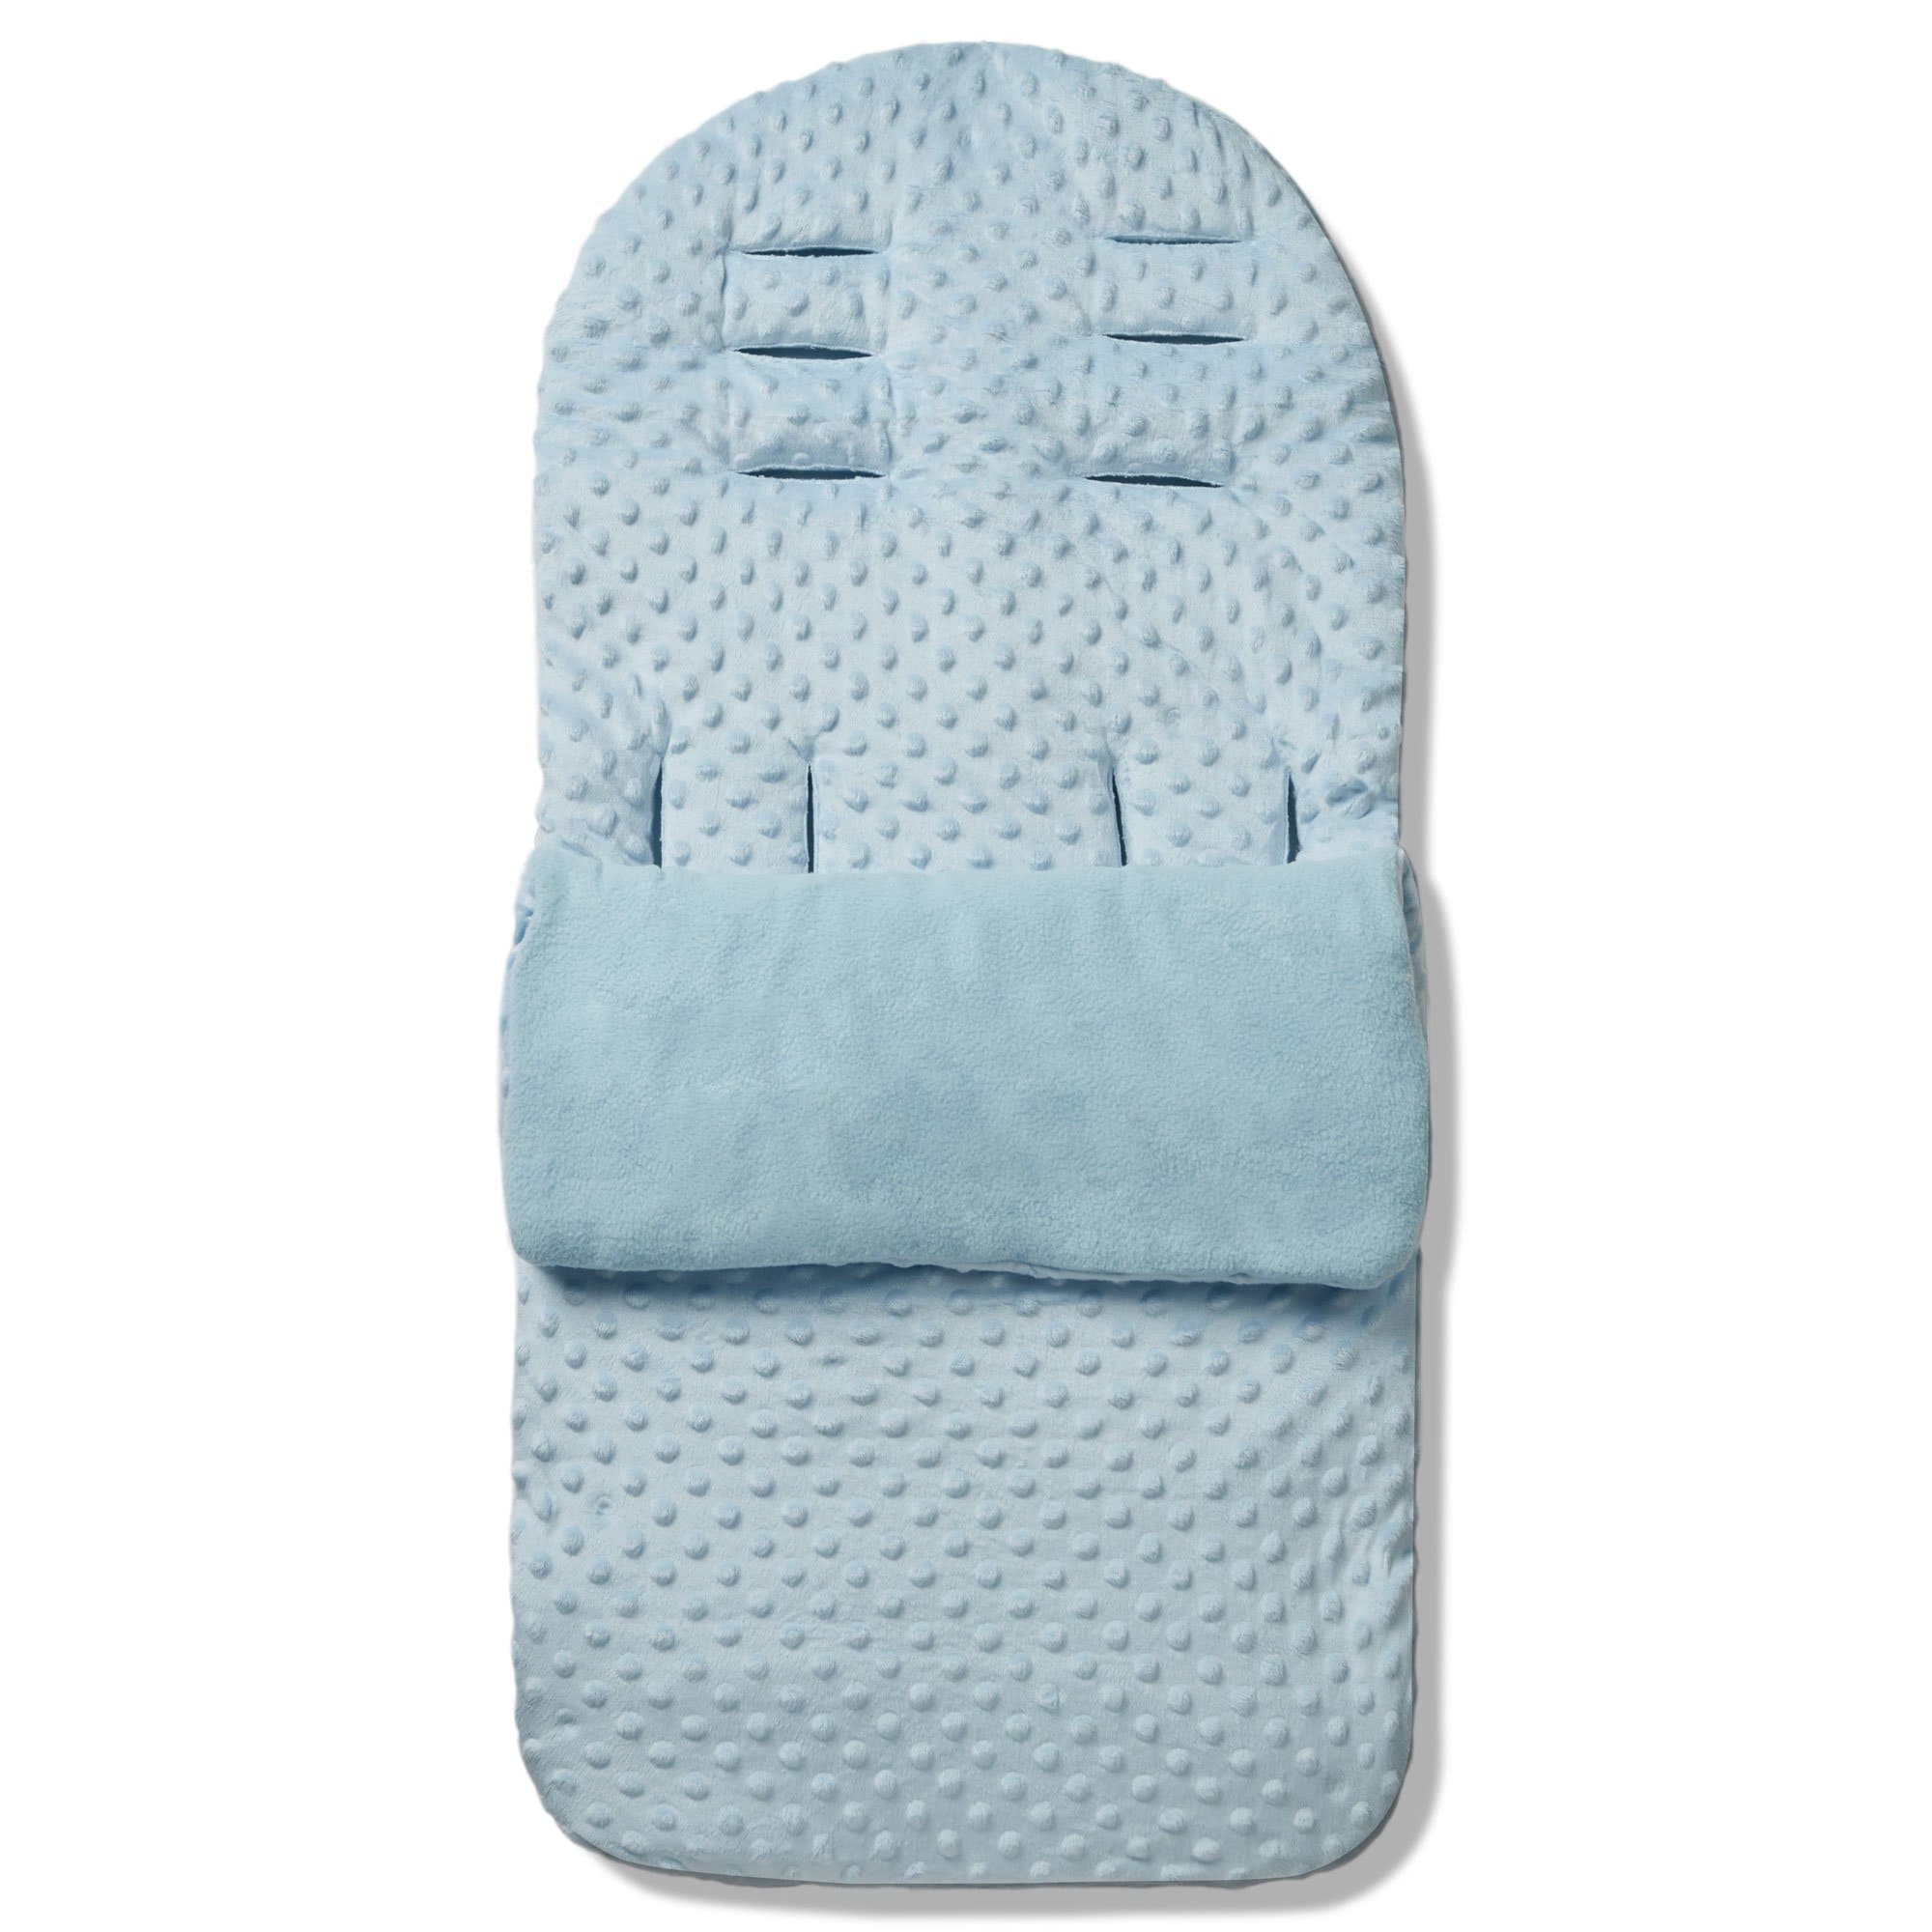 Dimple Footmuff / Cosy Toes Compatible with Mutsy - Blue / Fits All Models | For Your Little One